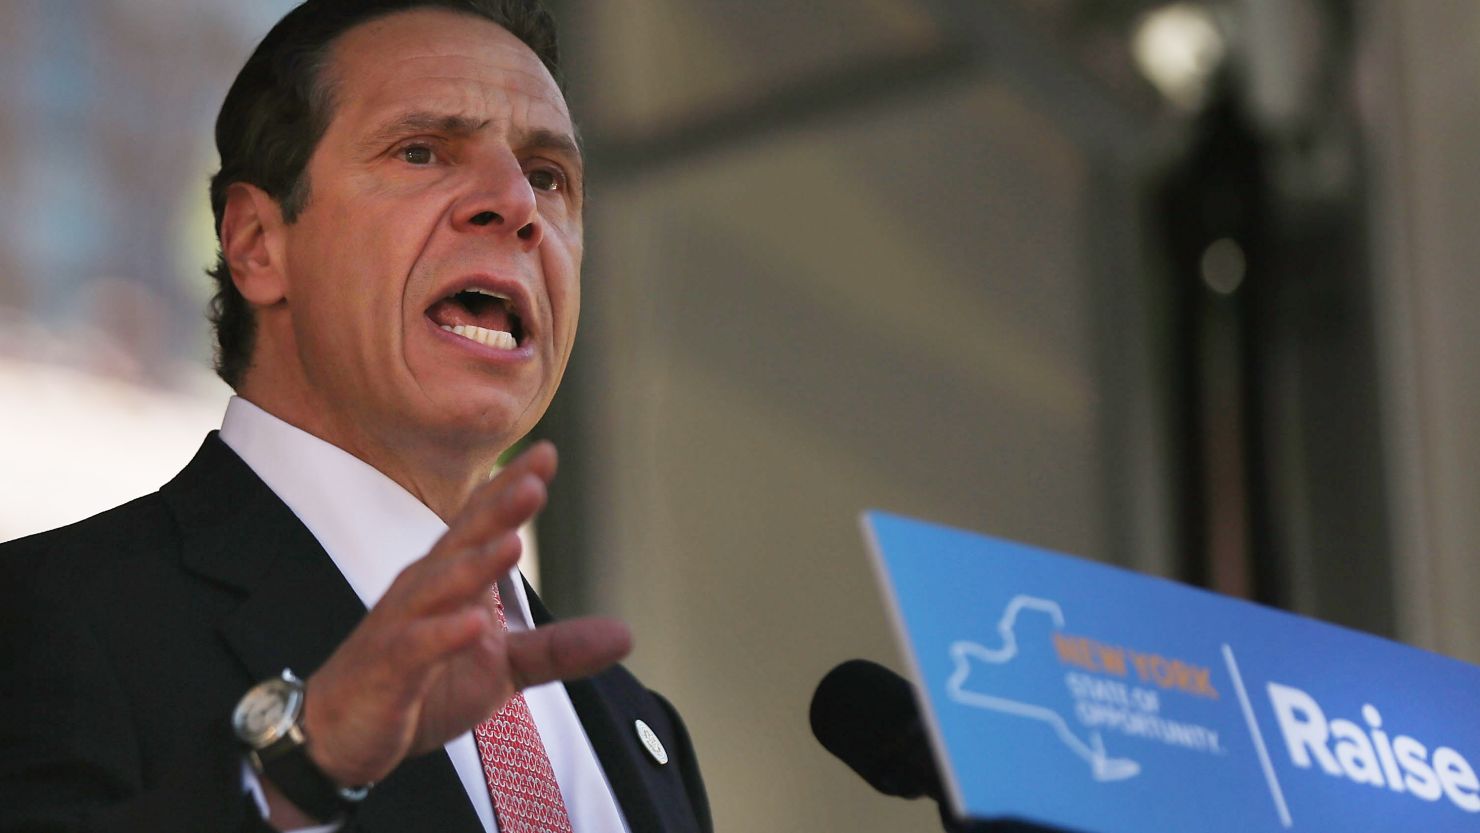 Gov. Andrew Cuomo: "Without trust, the justice system doesn't work."